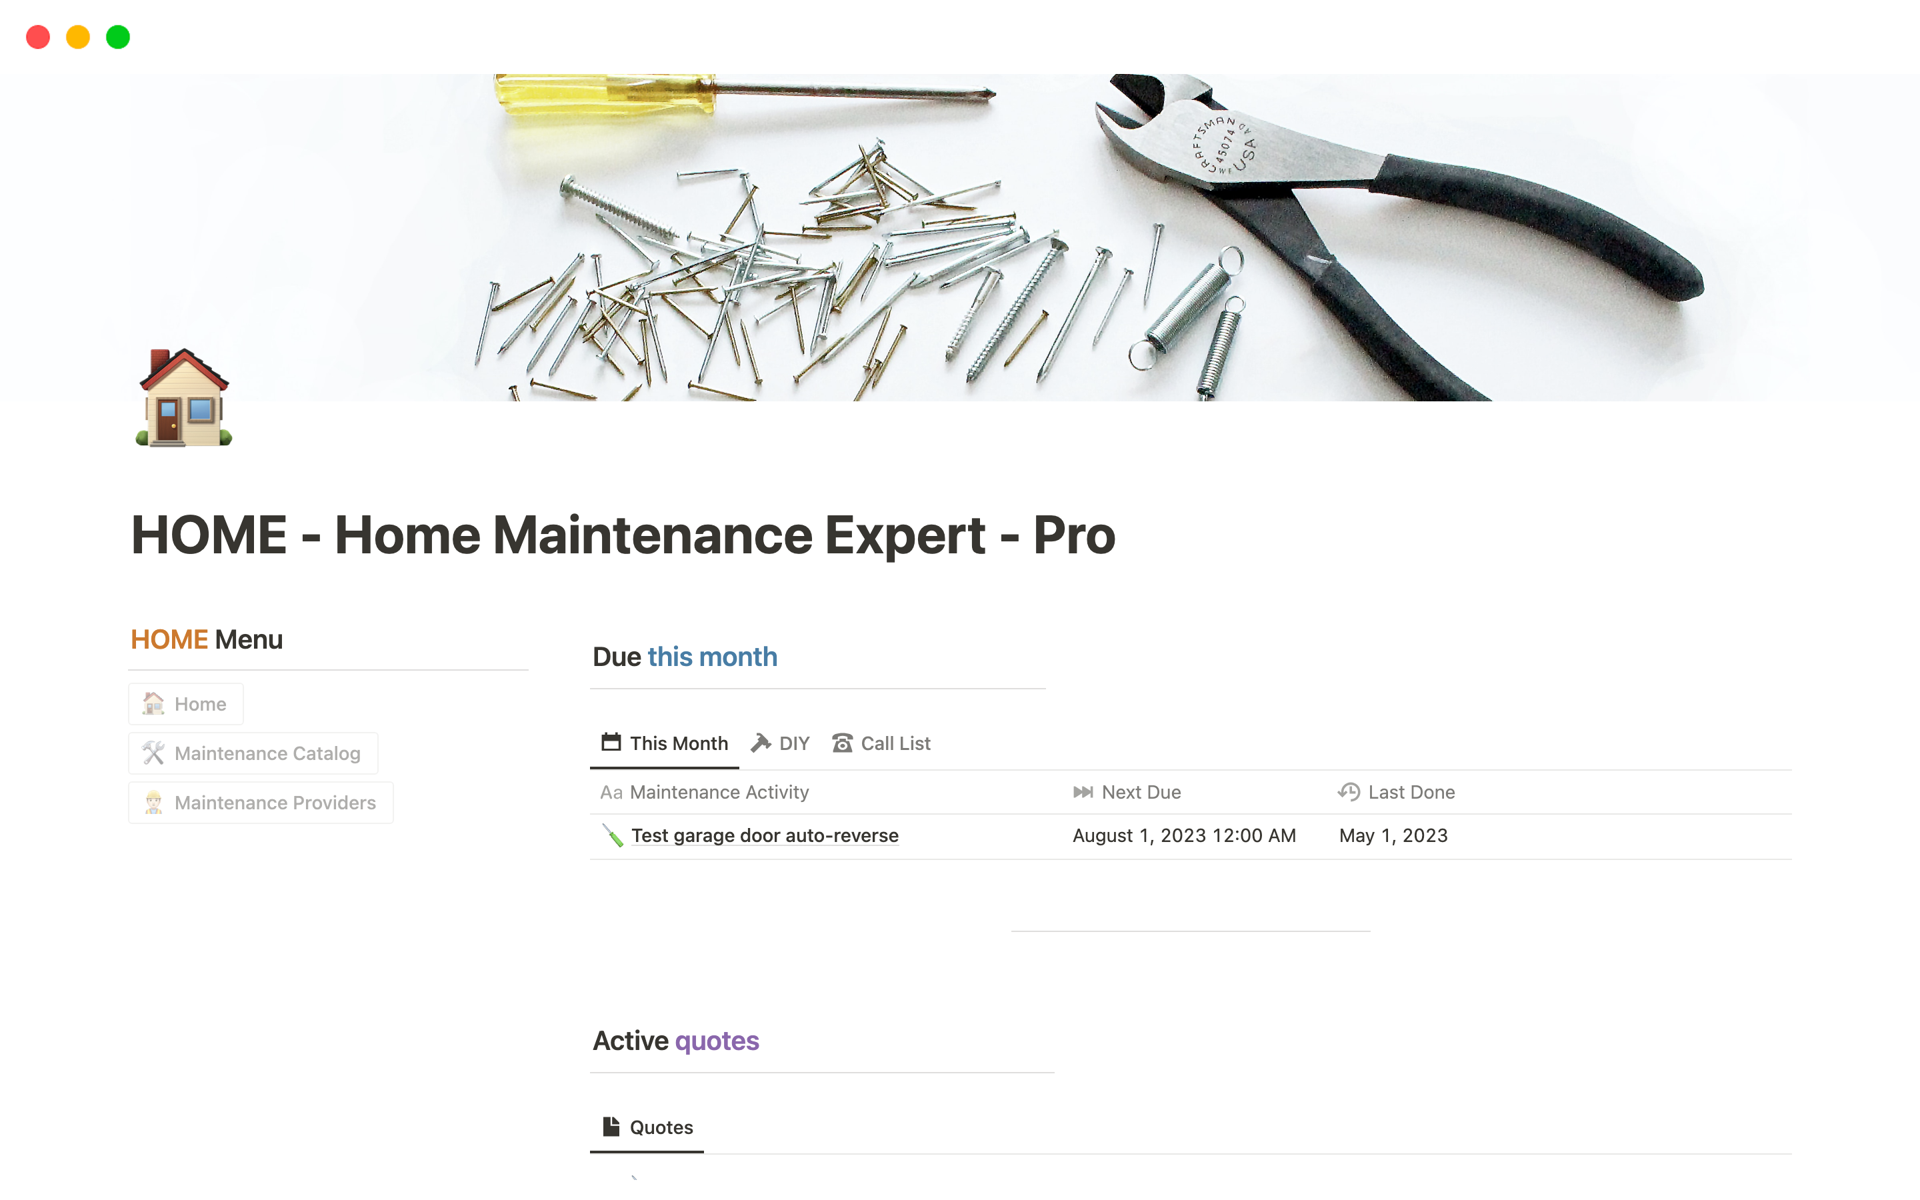 HOME Pro, the advanced Notion system, empowers homeowners with databases, dynamic maintenance tracking, service provider management, and a calendar view to keep homes impeccably maintained and stress-free.